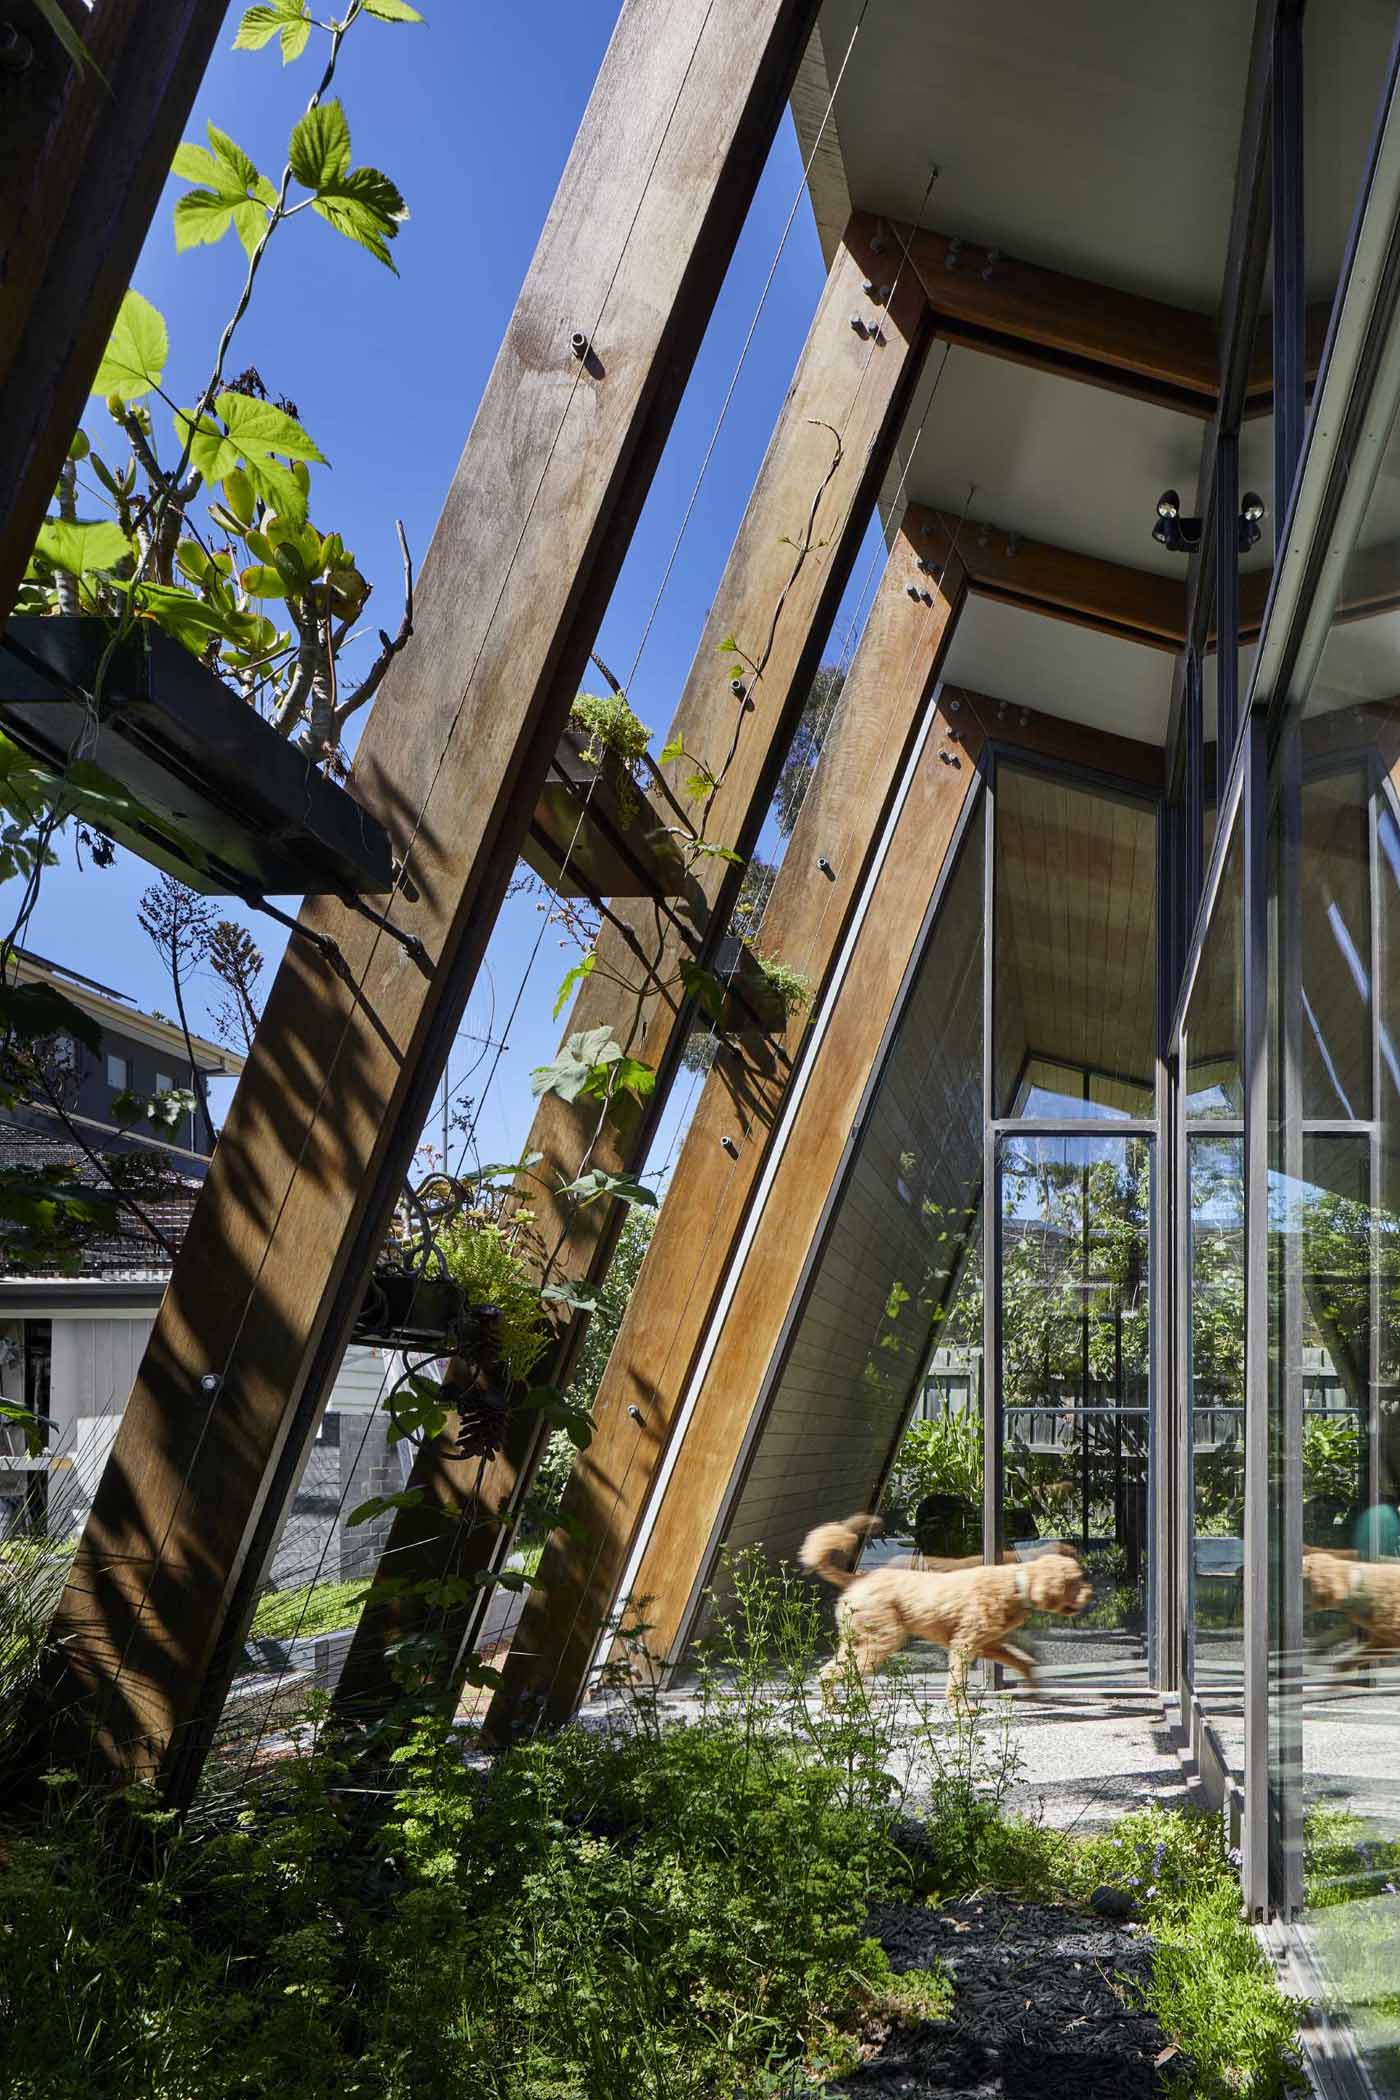 The arbor-like structure of this home addition includes shelving and wire guides that over time, will allow the plants to grow, providing shade and privacy for the interior.